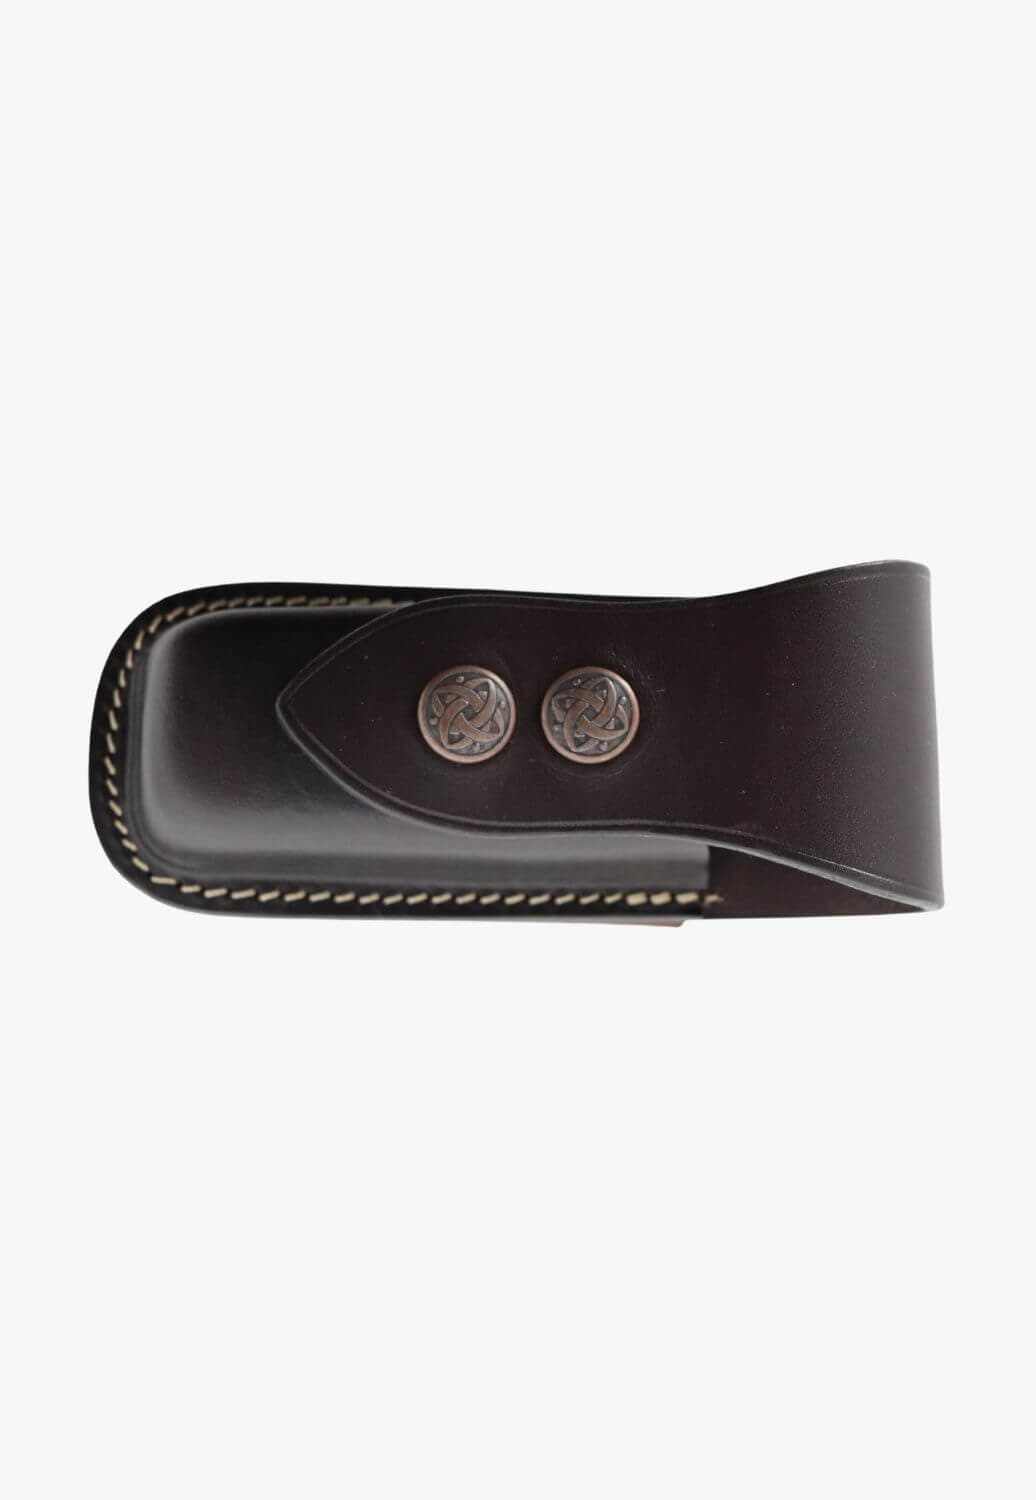 LEGENDS ACCESSORIES-Pocket Knives Brown Leather Knife Horizontal Press Stud Pouch